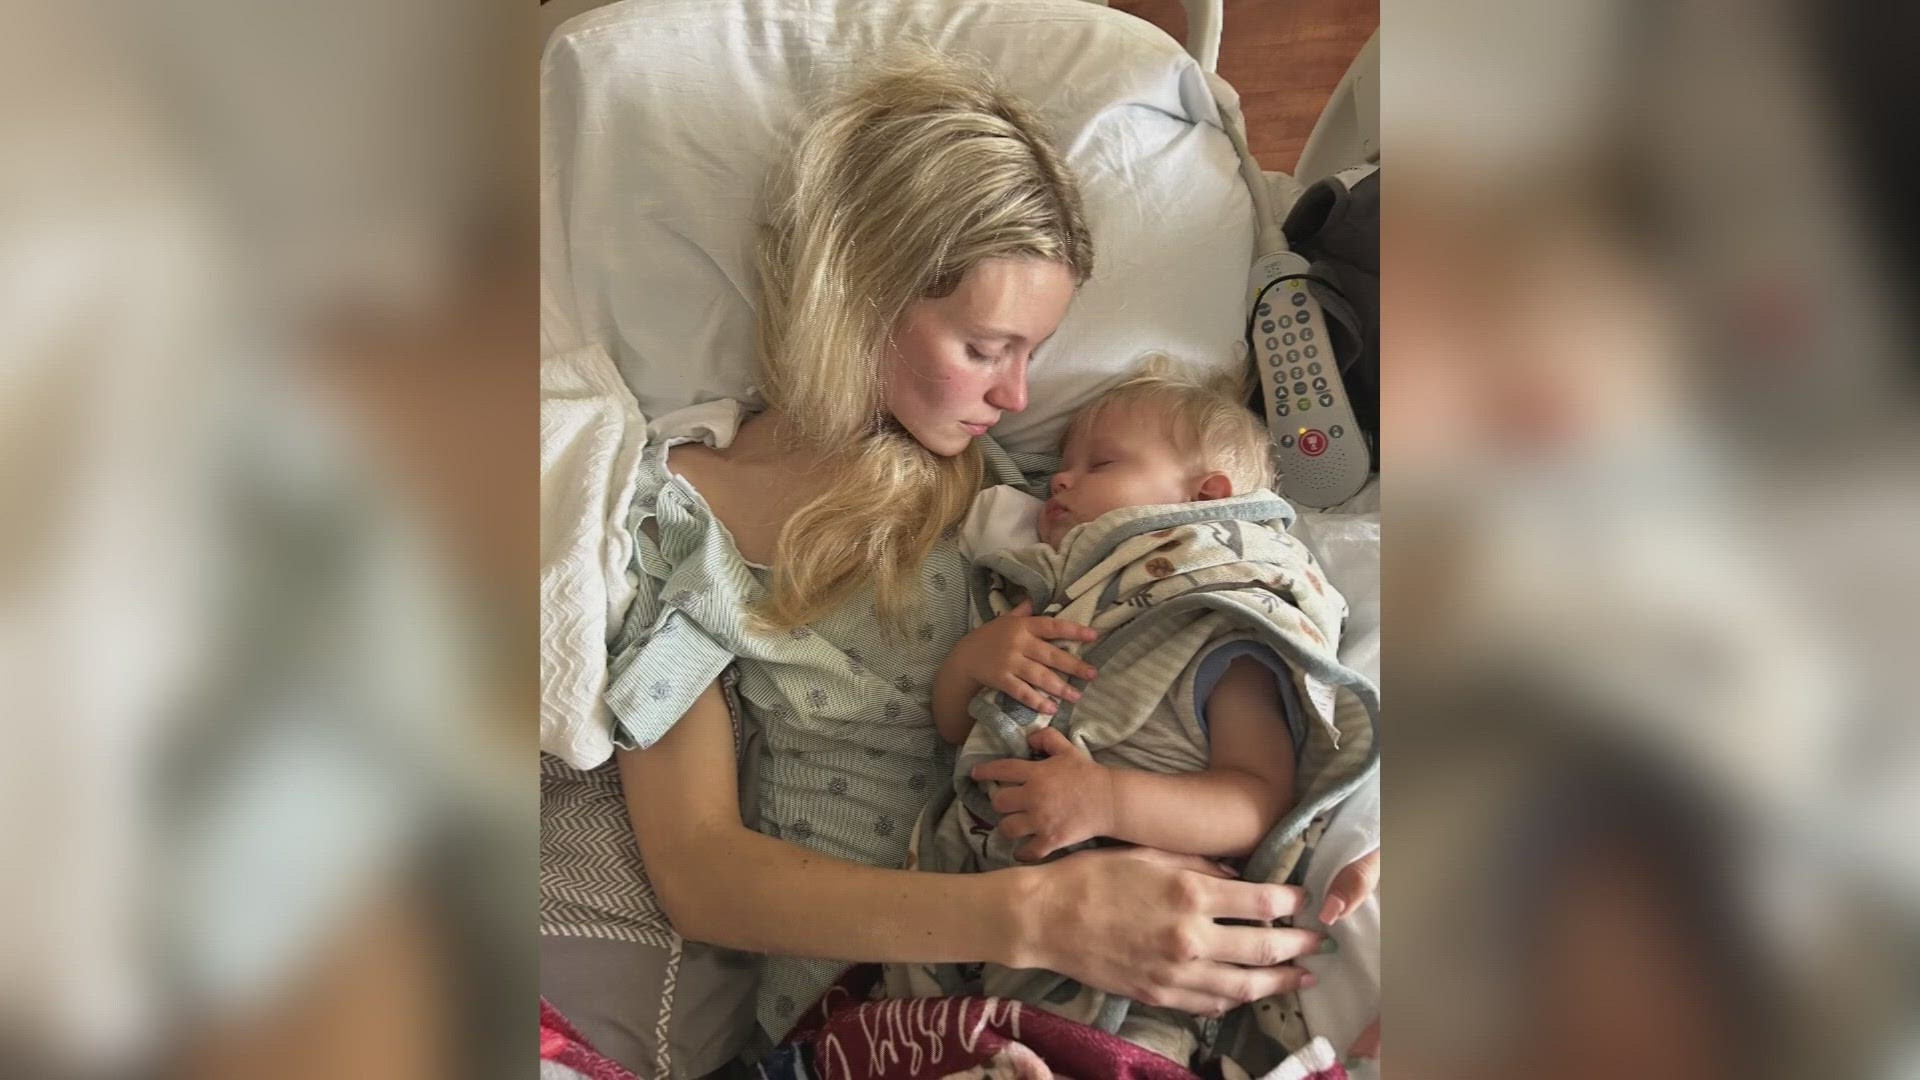 Mount Sterling native Kiley Kunis loved her life as a stay-at-home mom. Everything changed two weeks ago, while she was on vacation with her fiancé in West Virginia.